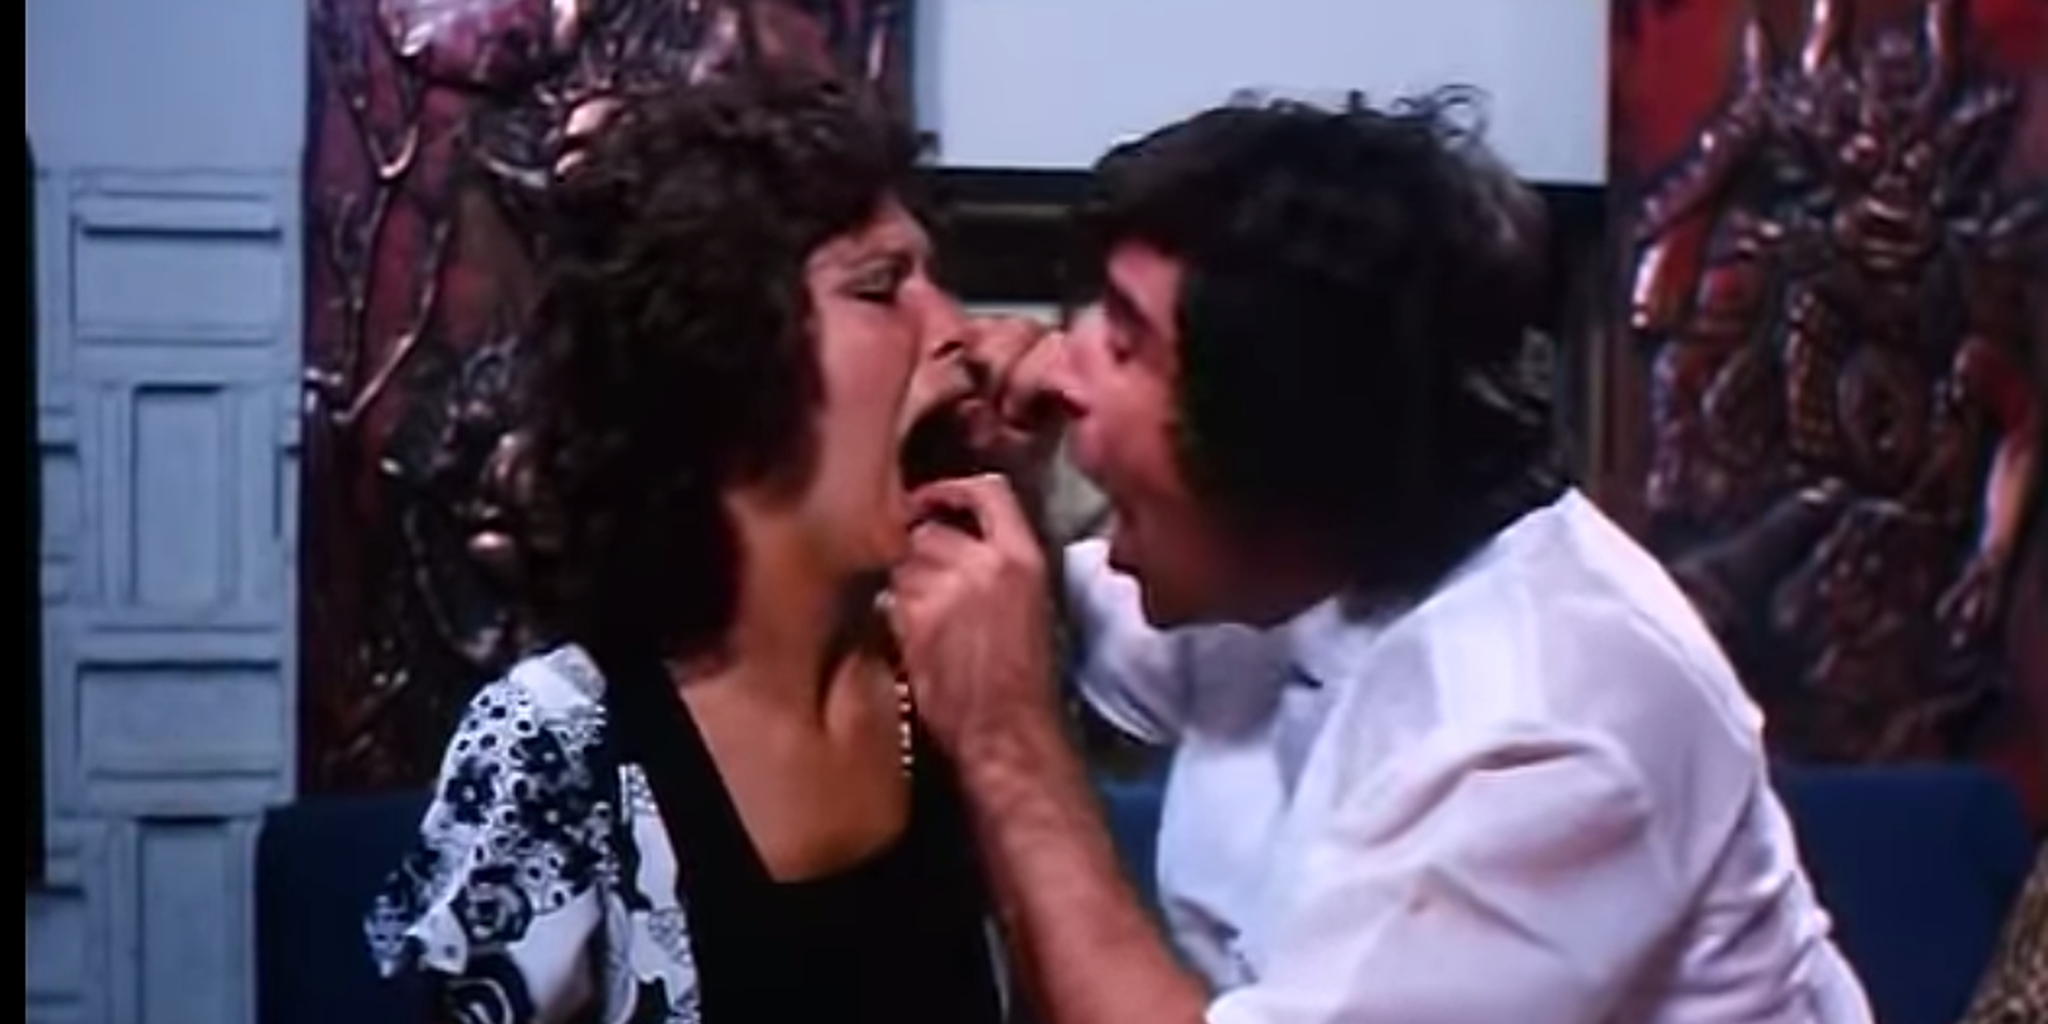 Linda lovelace doing a blowjob in the movie deep throat